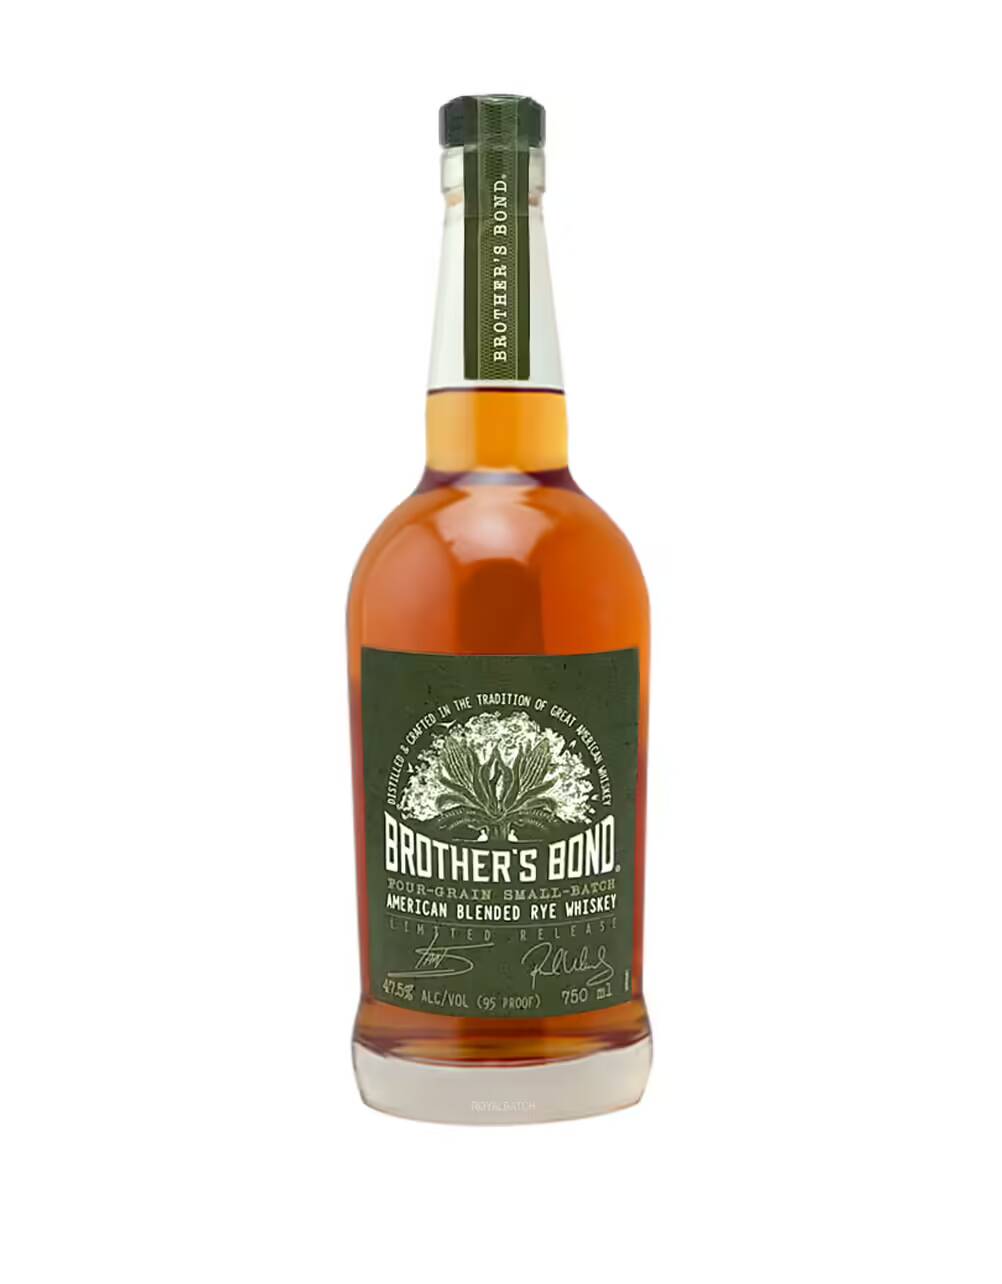 Brothers Bond Four Grain Small Batch American Blended Rye Limited Release Whiskey